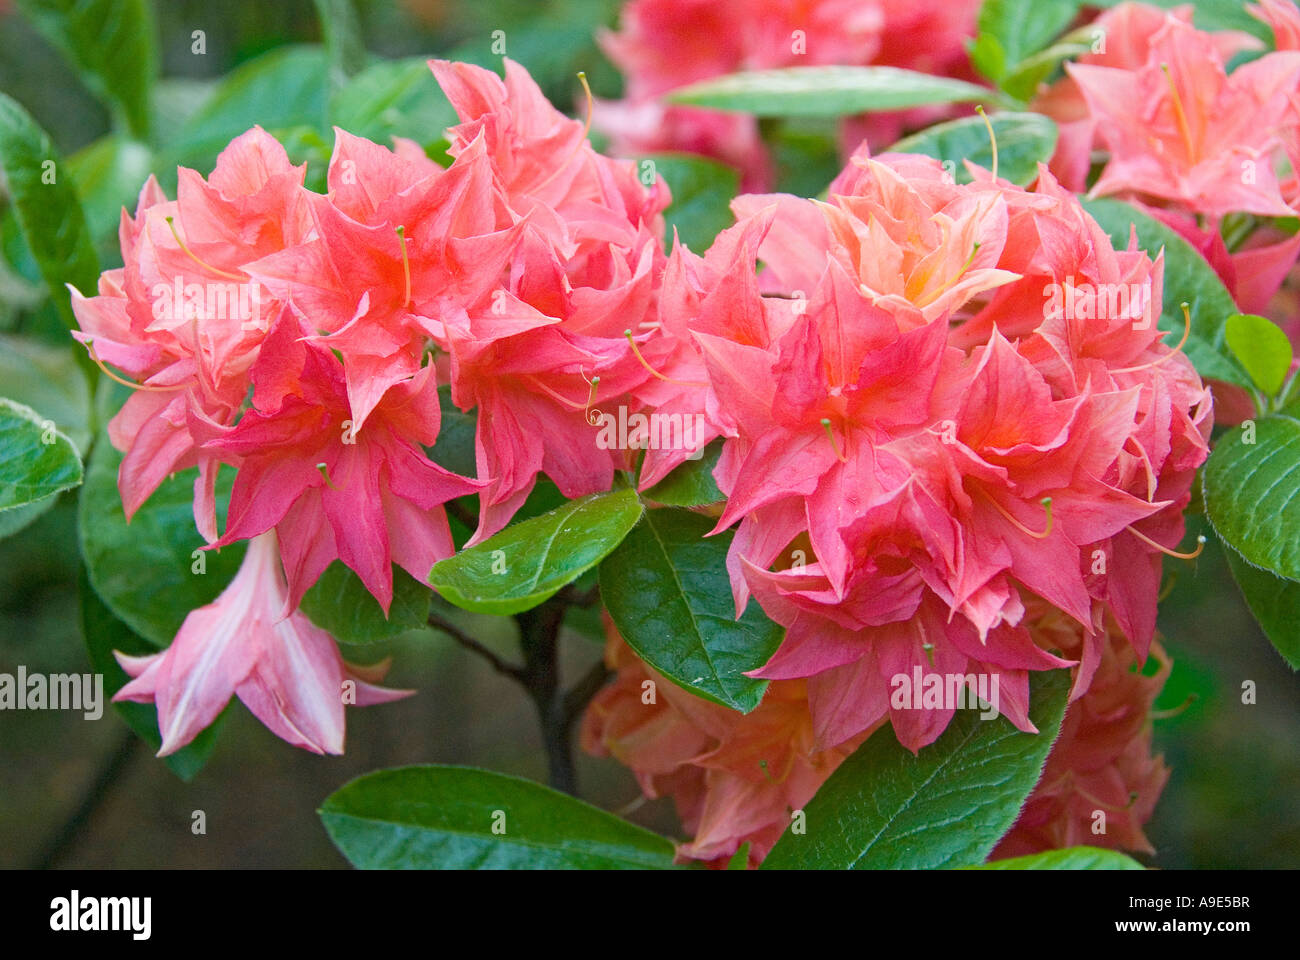 Red Rhododendron 'Norma' blooming Stock Photo